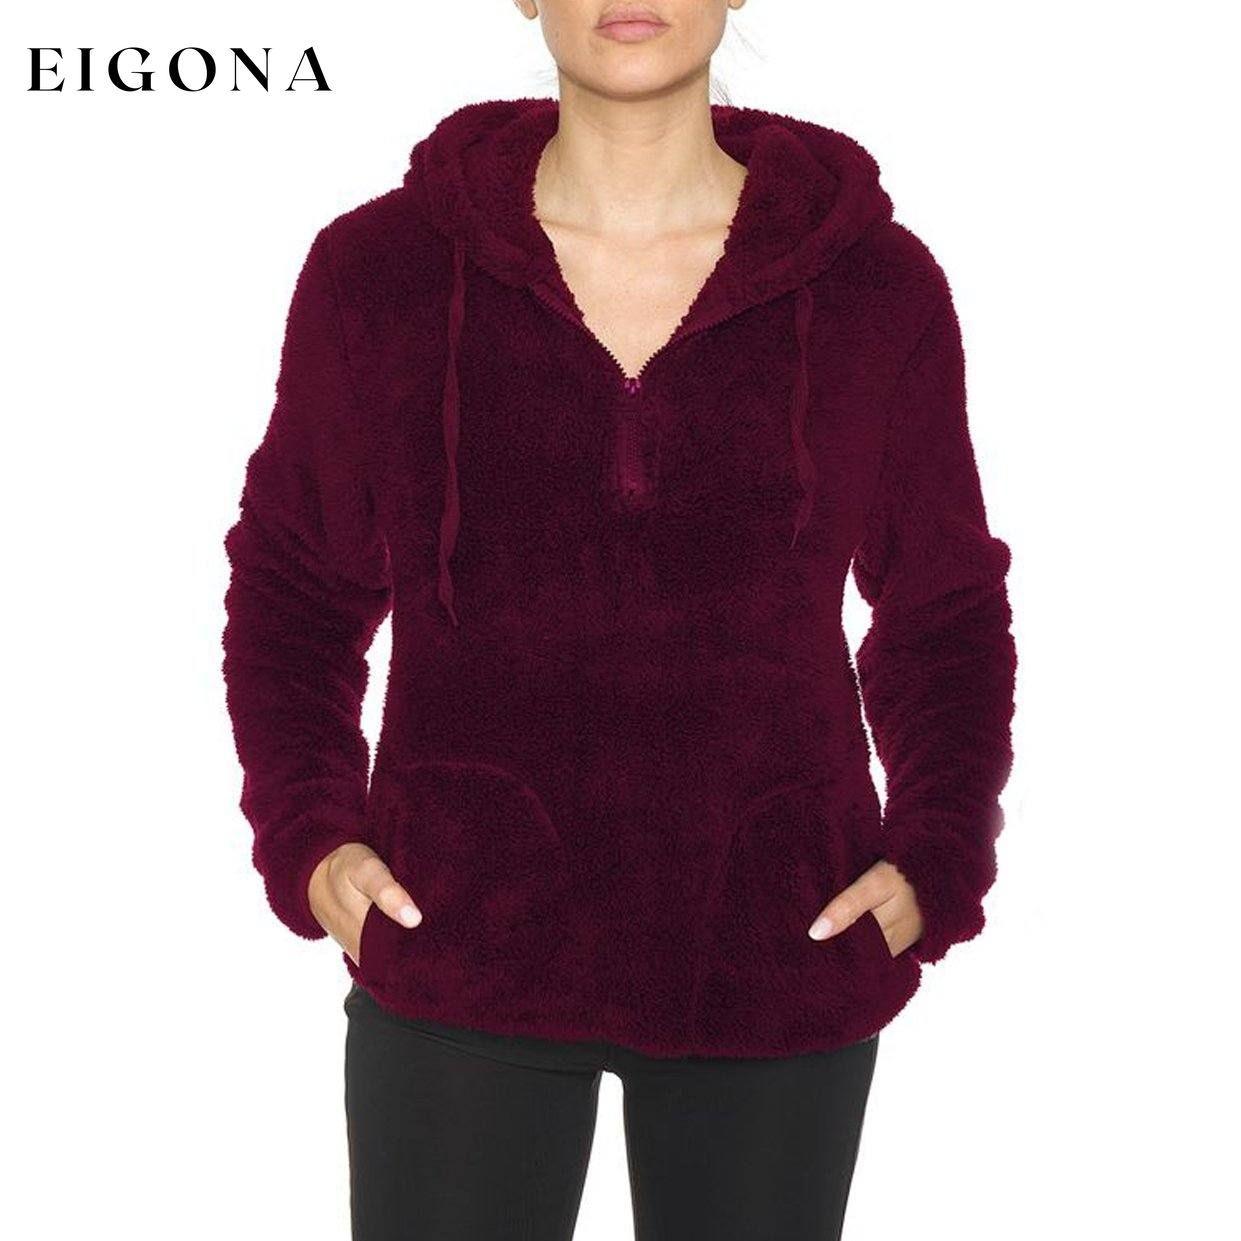 1/4 Zip Hooded Sherpa In and Out Lined Pull Over with 2 Pockets Burgundy __stock:250 Jackets & Coats refund_fee:1200